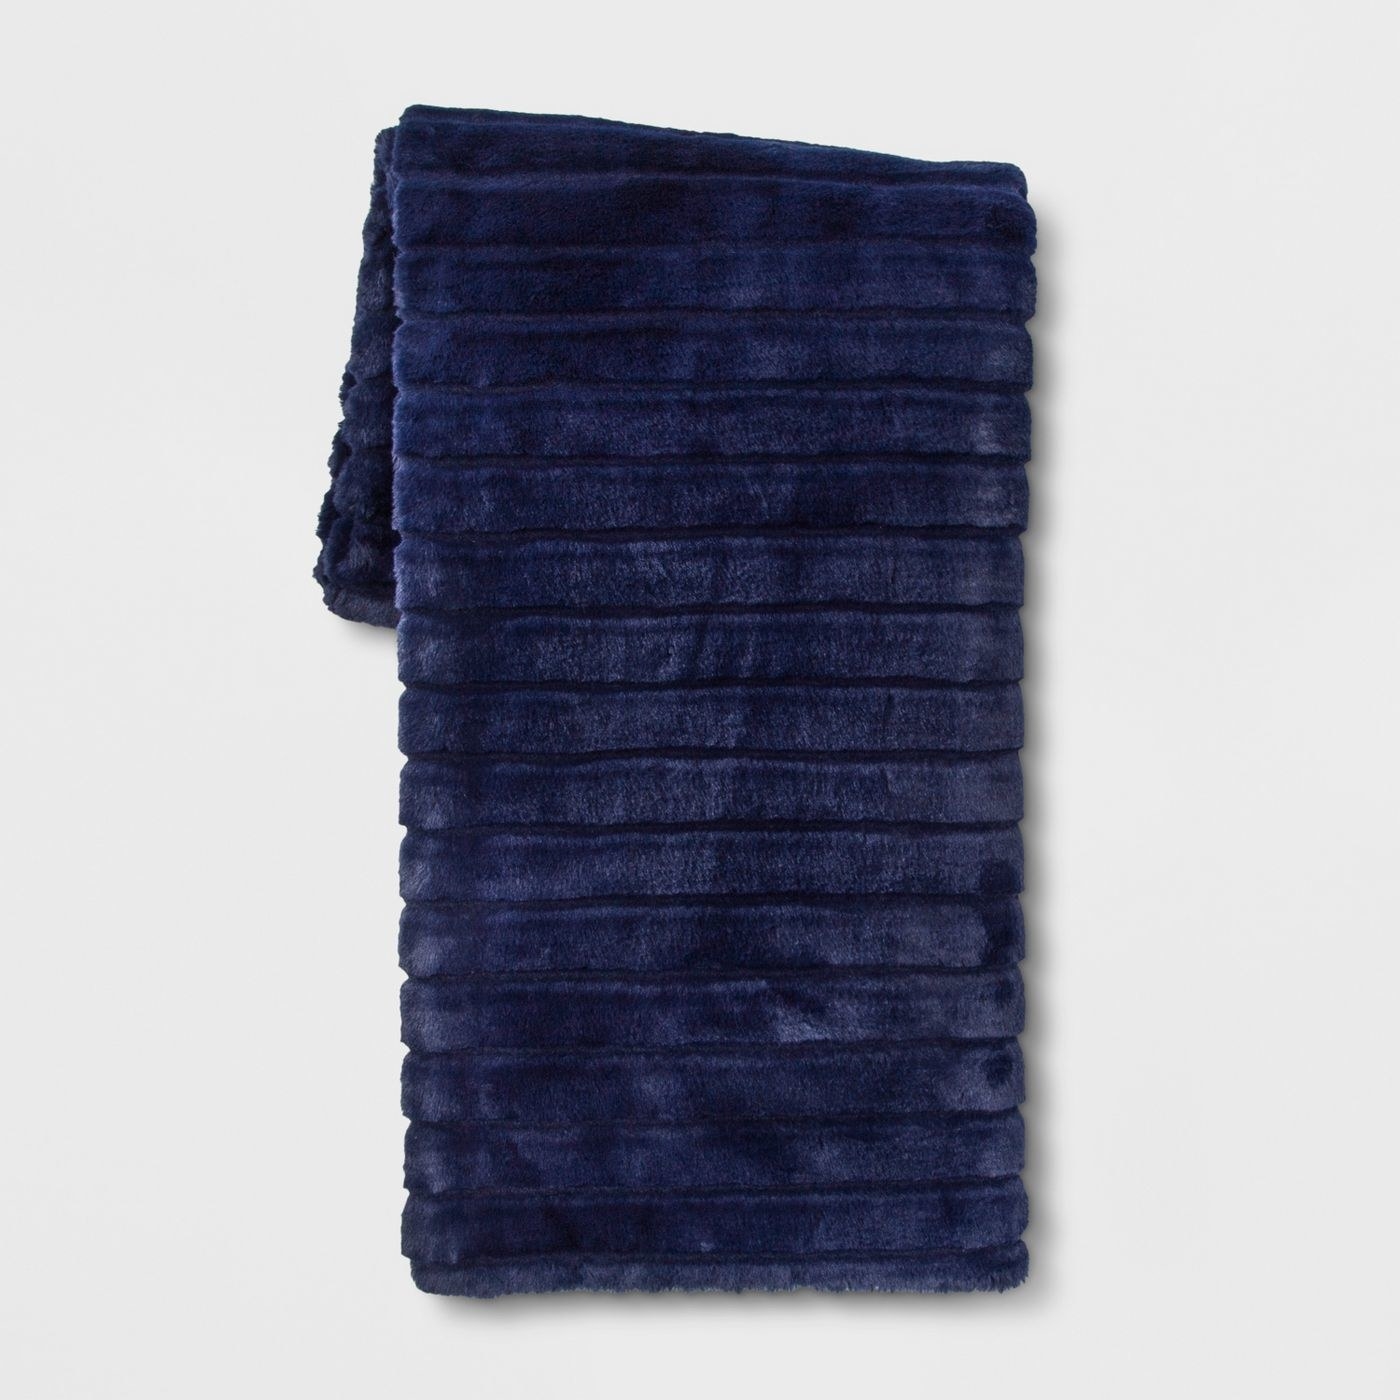 The blue throw blanket